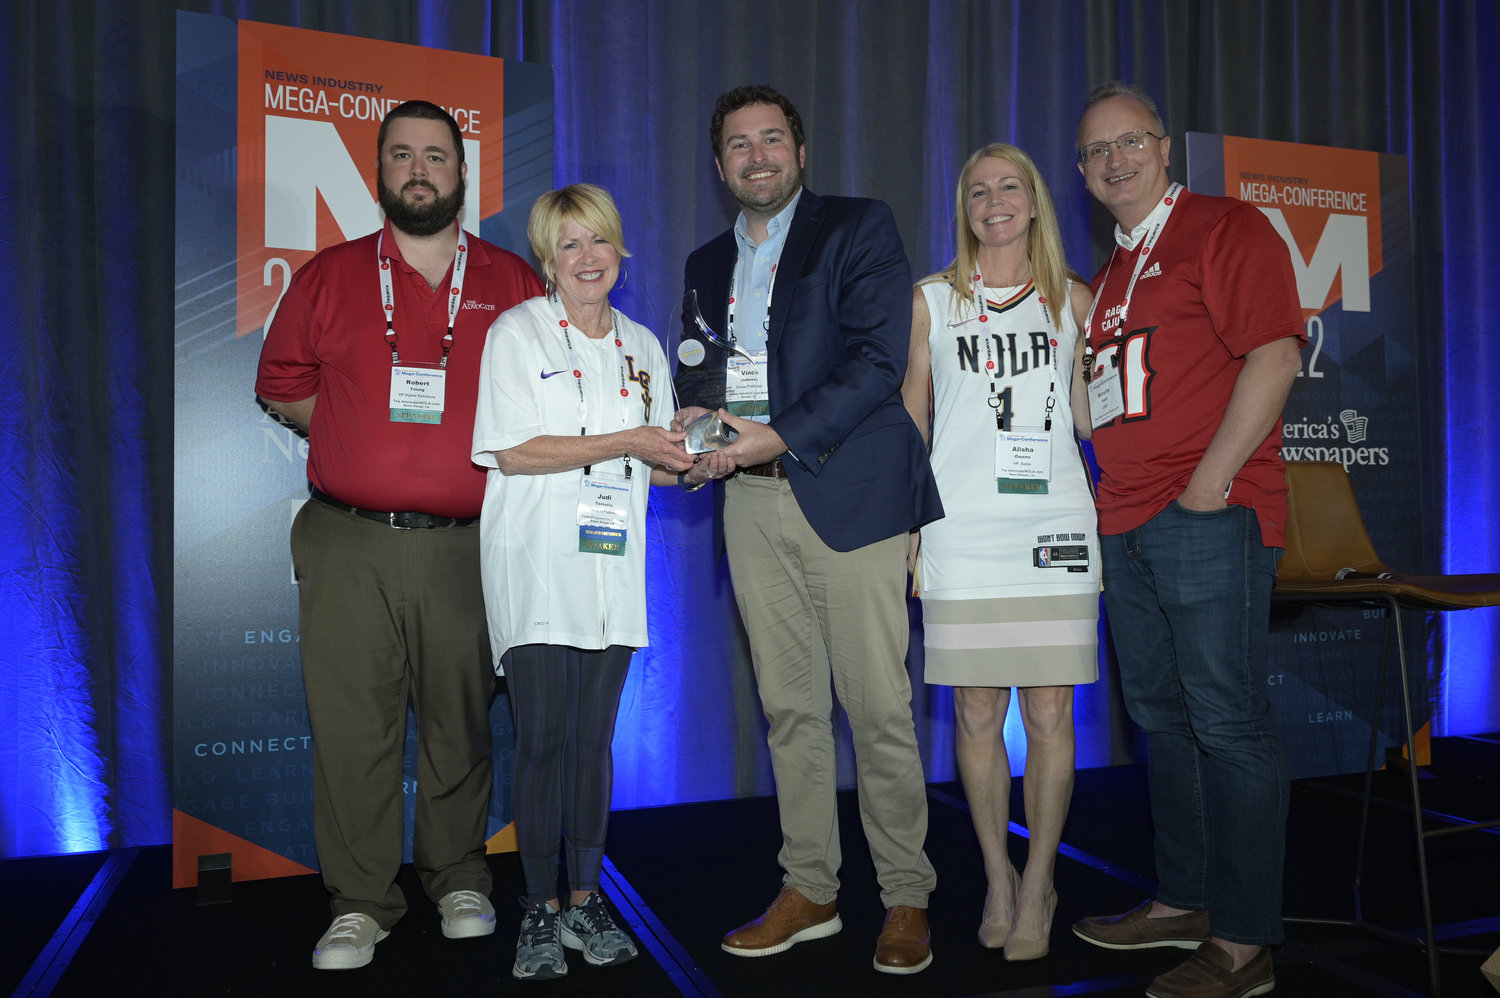 Vince Johnson (center) presents the 2022 award to (l-r) Kevin Hall, chief revenue officer; Judi Terzotis, president and publisher; Alisha Owens, VP, sales; and Robert Young, VP, digital solutions. (Photo by Phelan M. Ebenhack / PME Photography, Inc.)